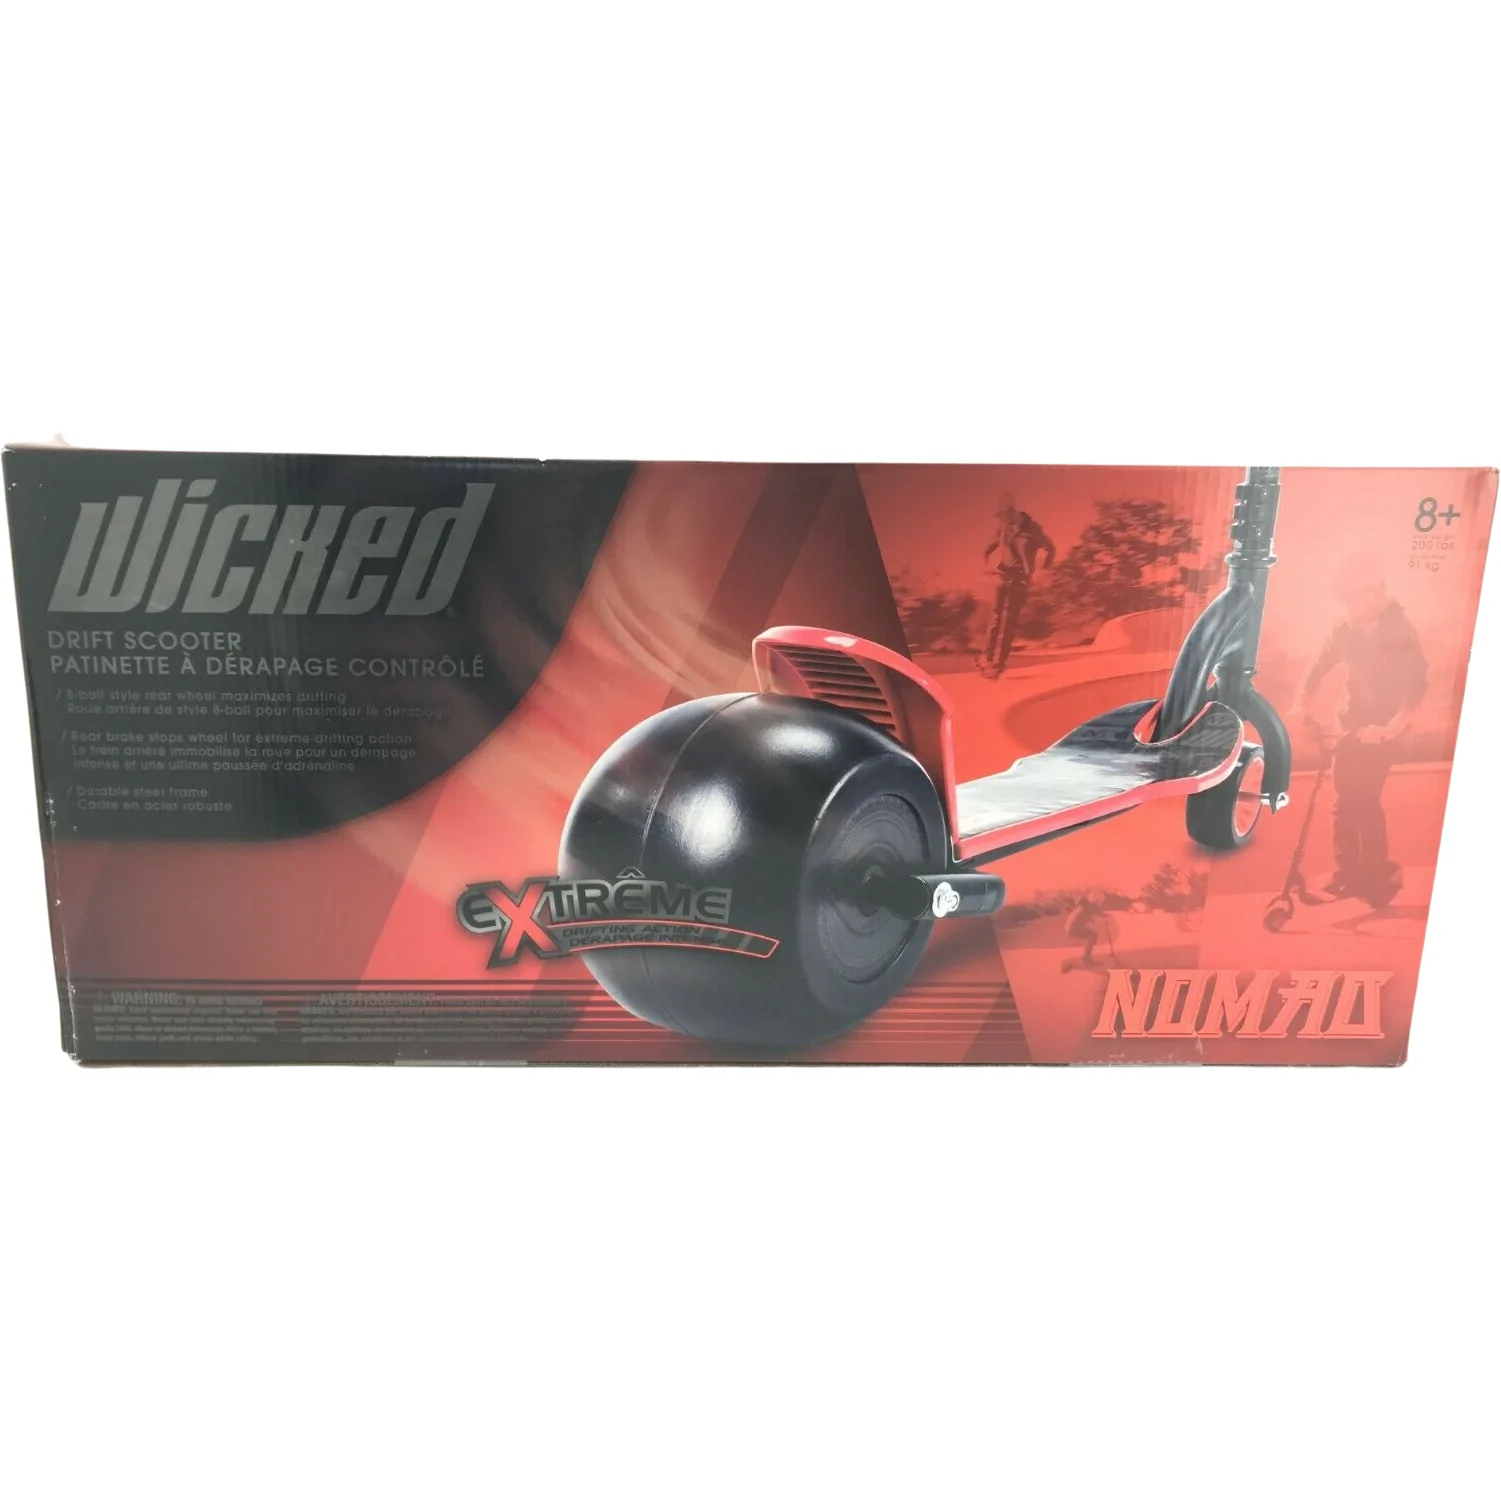 Wicked Drift Scooter: Action Scooter / Kid's Scooter / Black & Red